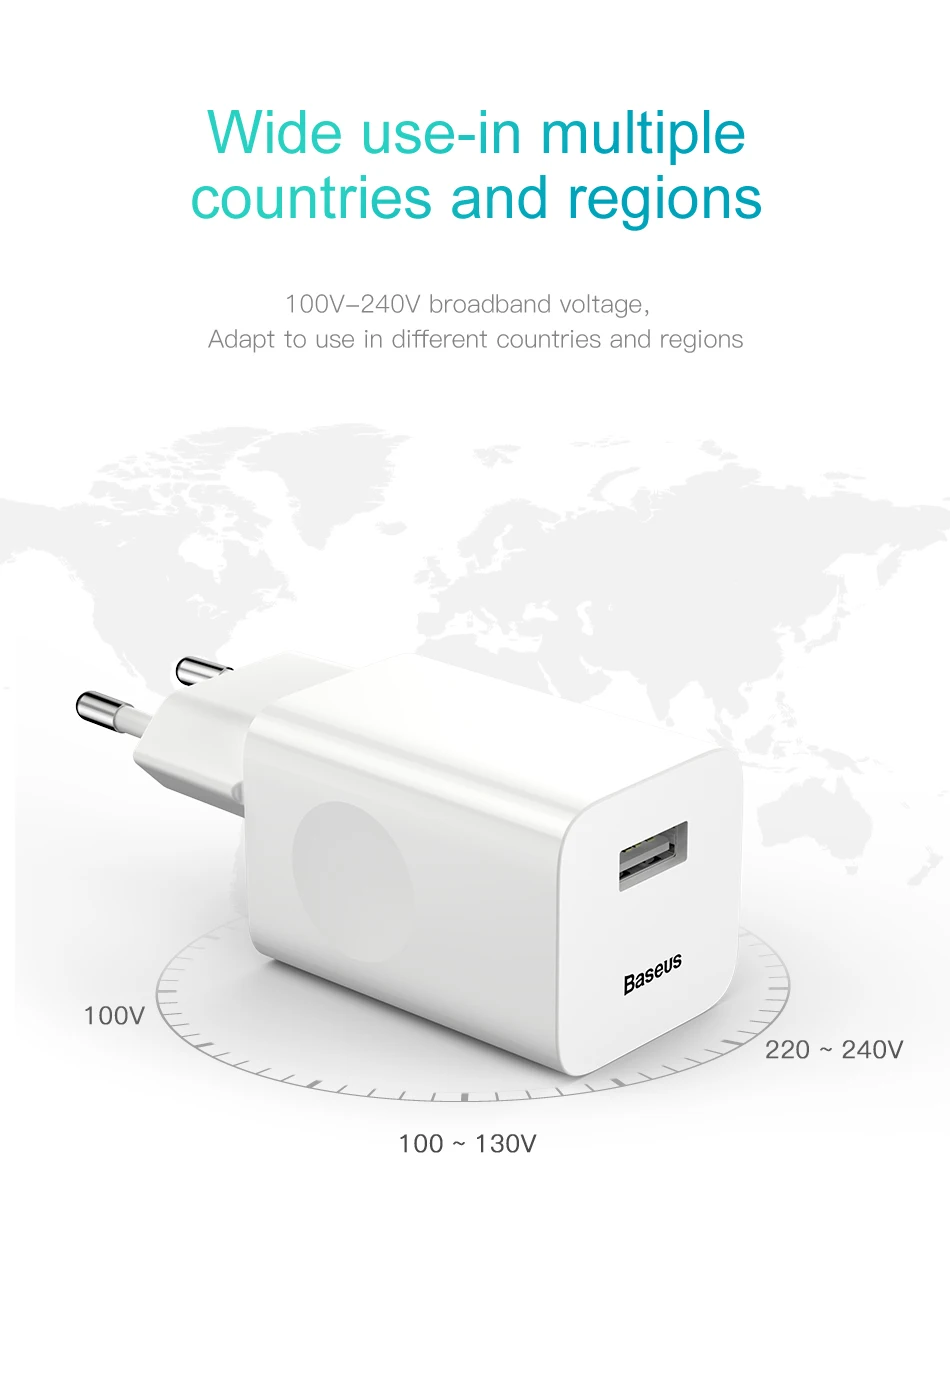 Baseus 24W Quick Charge 3.0 USB Charger for iPhone X xr QC3.0 Xiaomi